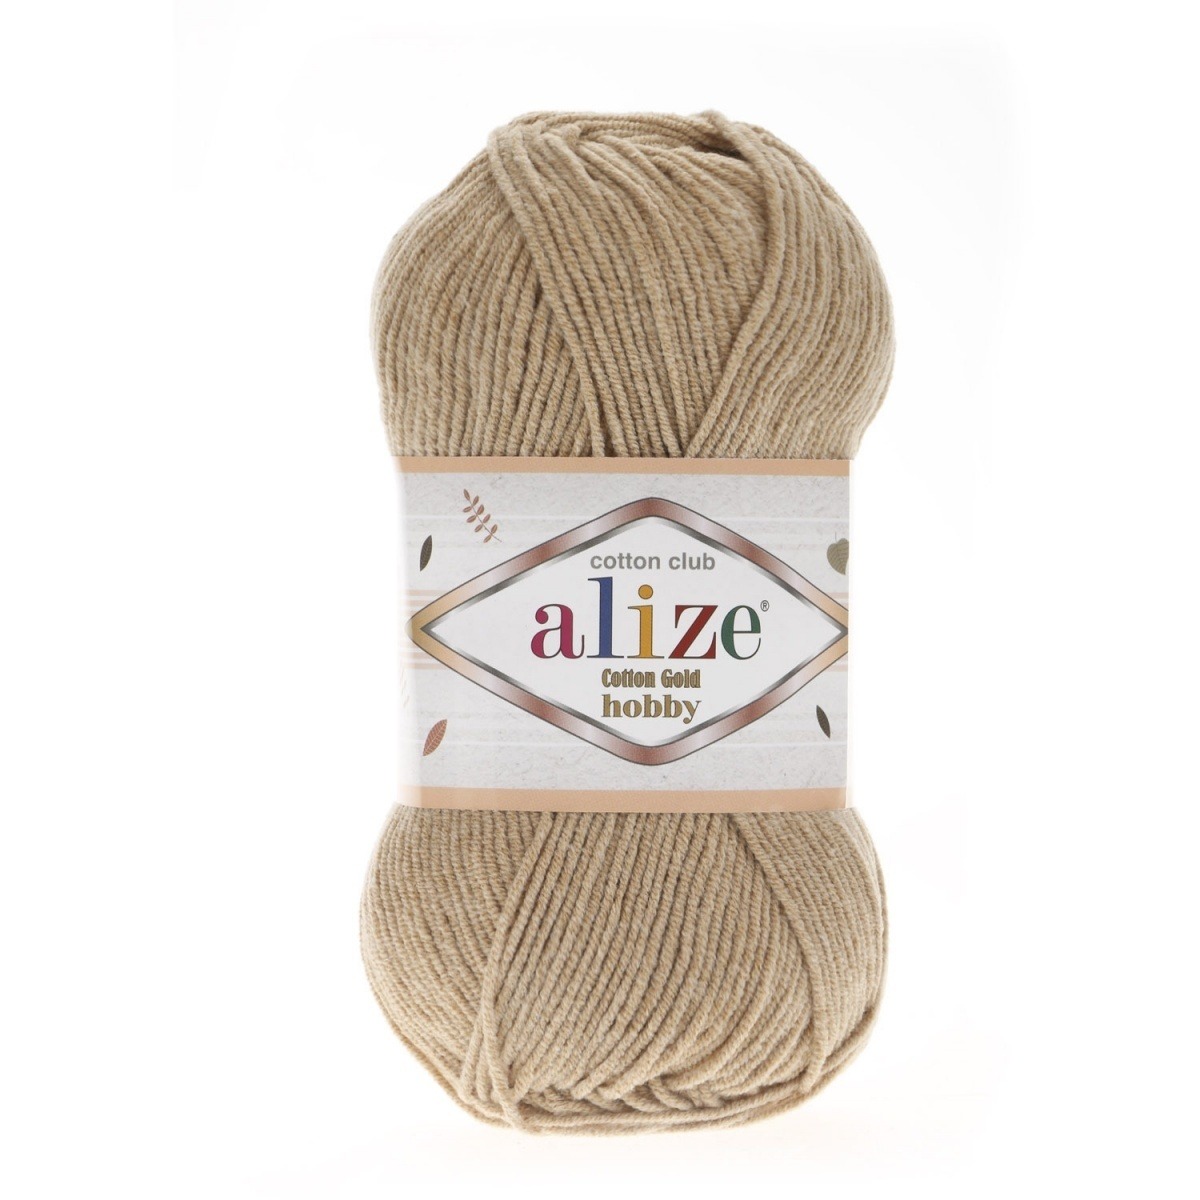 Alize "Cotton gold hobby" (262)